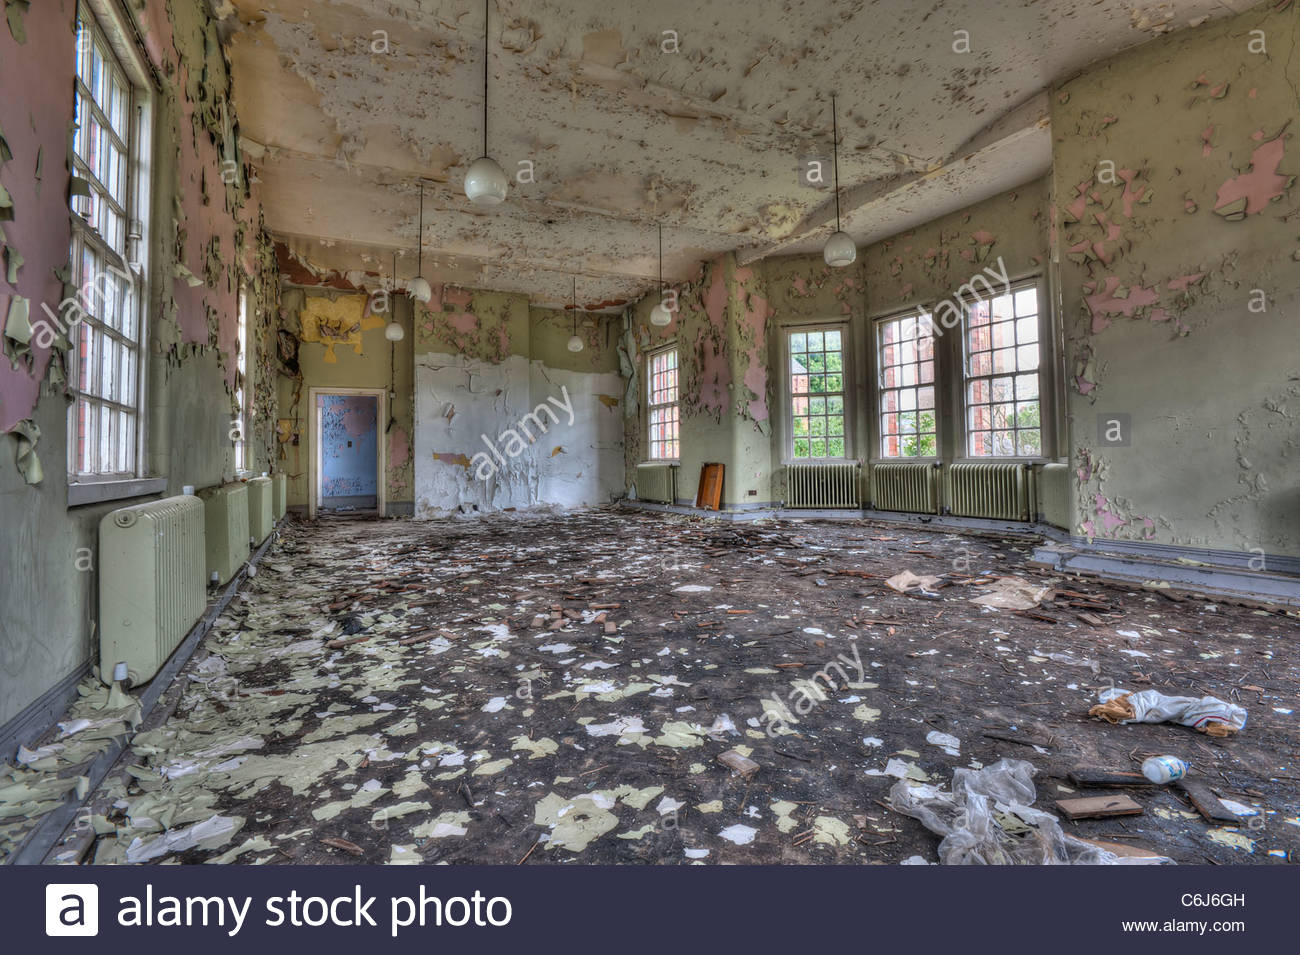 Abandoned Day Room In The Lunatic Asylum Ward Of A Derelict